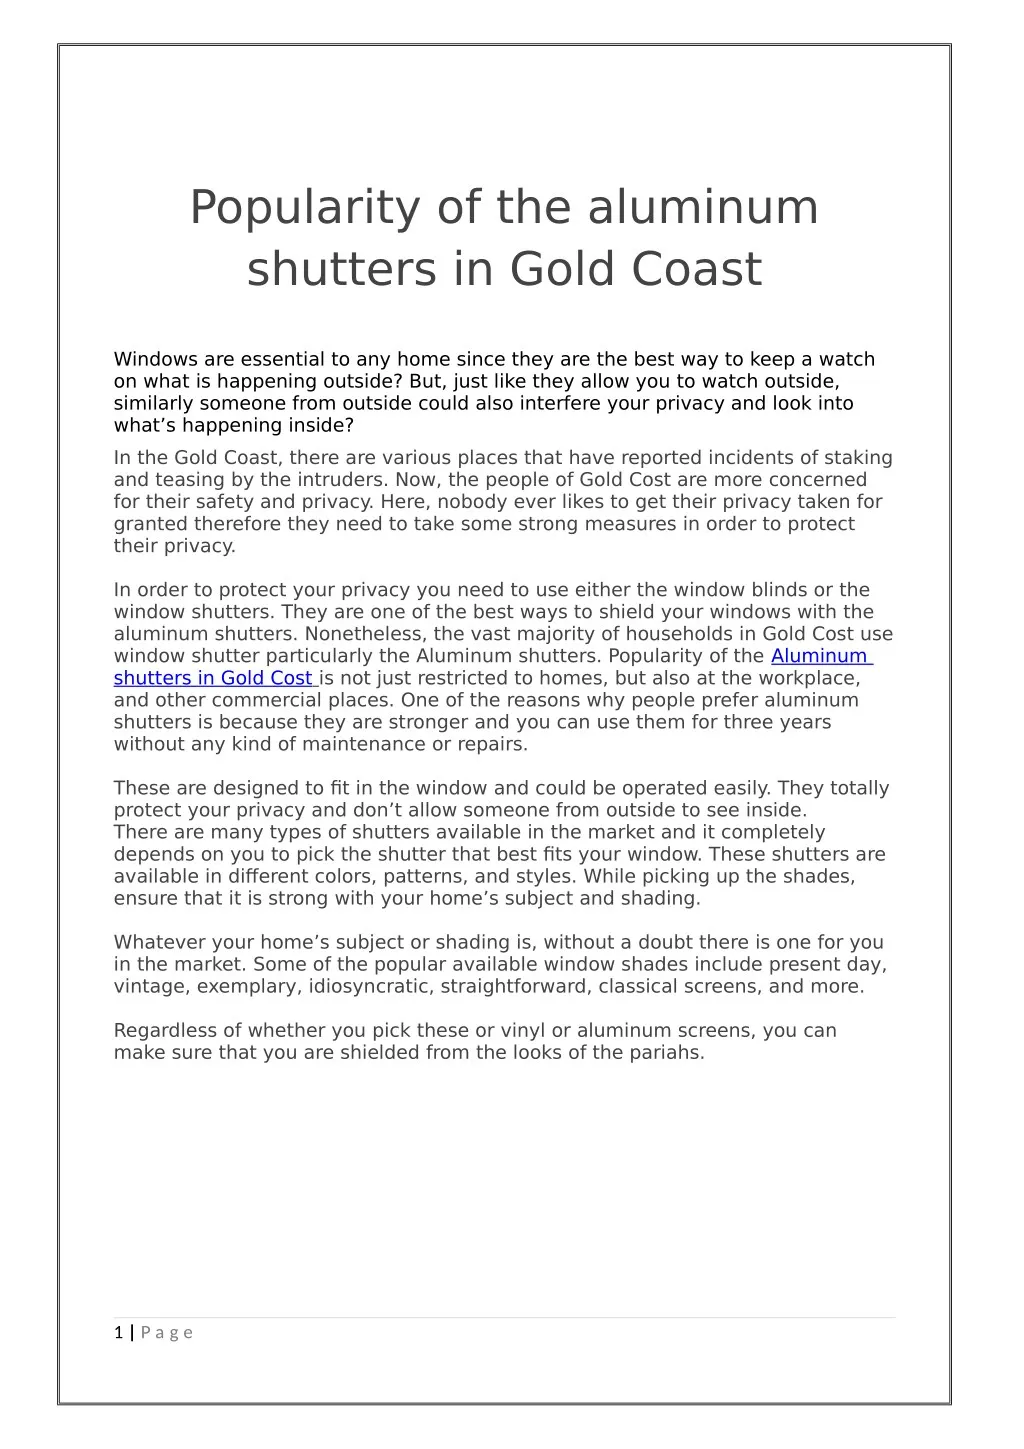 popularity of the aluminum shutters in gold coast